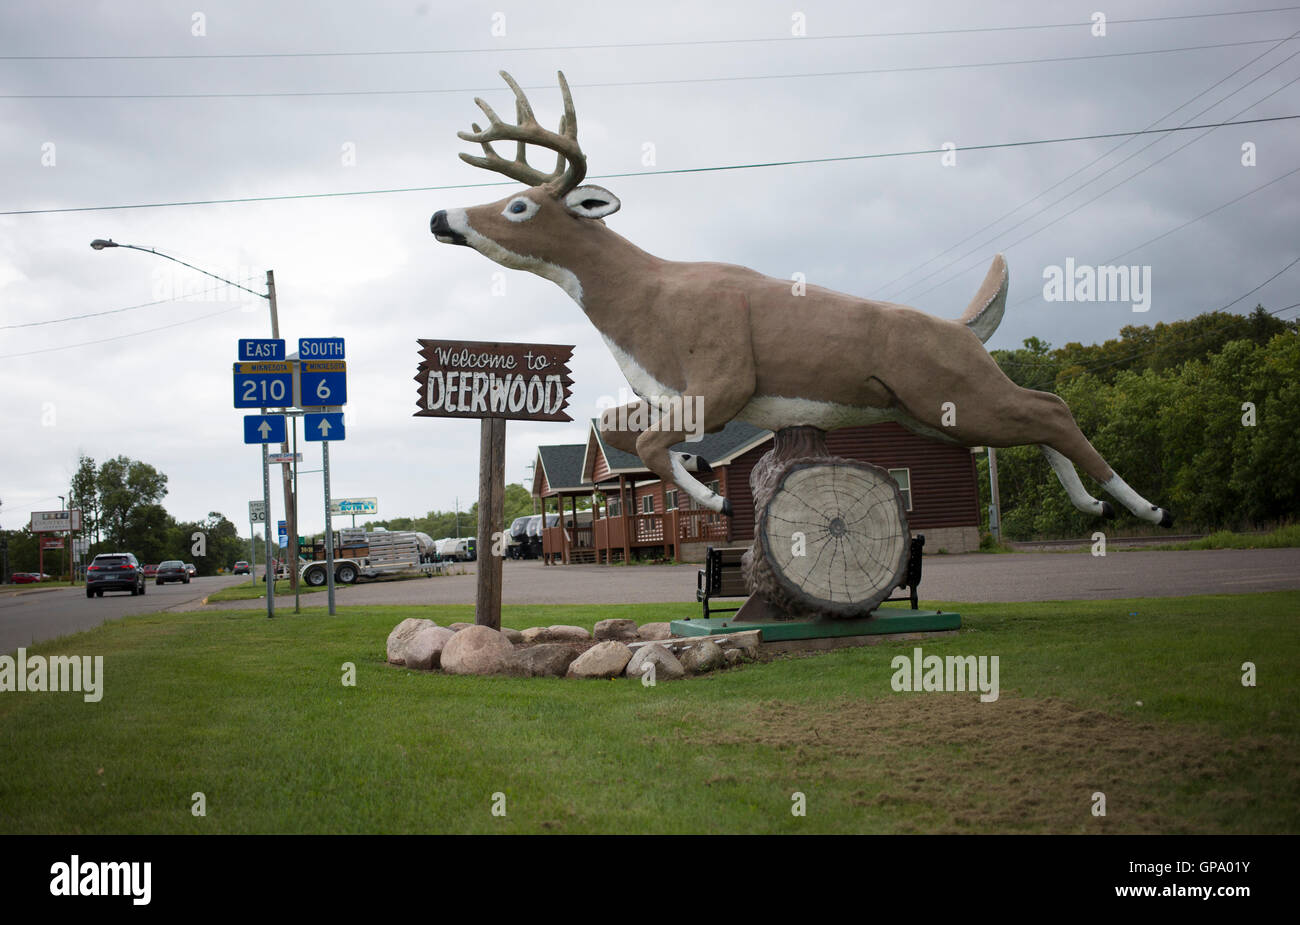 A statue of a deer is seen by a sign welcoming drivers to Deerwood, Minnesota Stock Photo